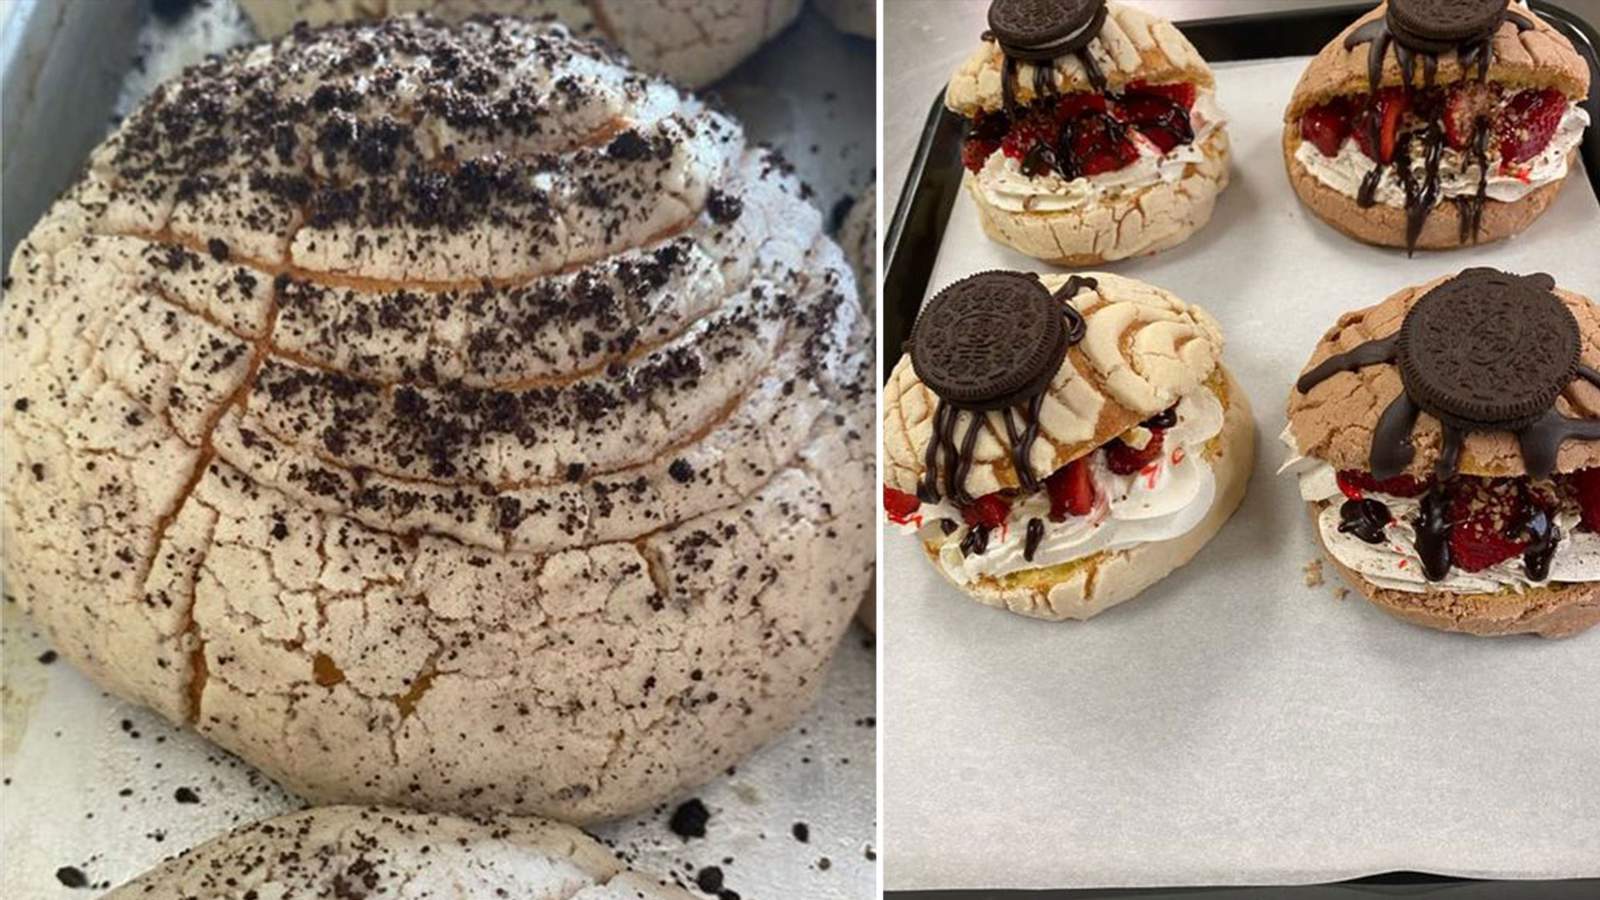 Oreo conchas aren’t the only unique treat at this San Antonio bakery